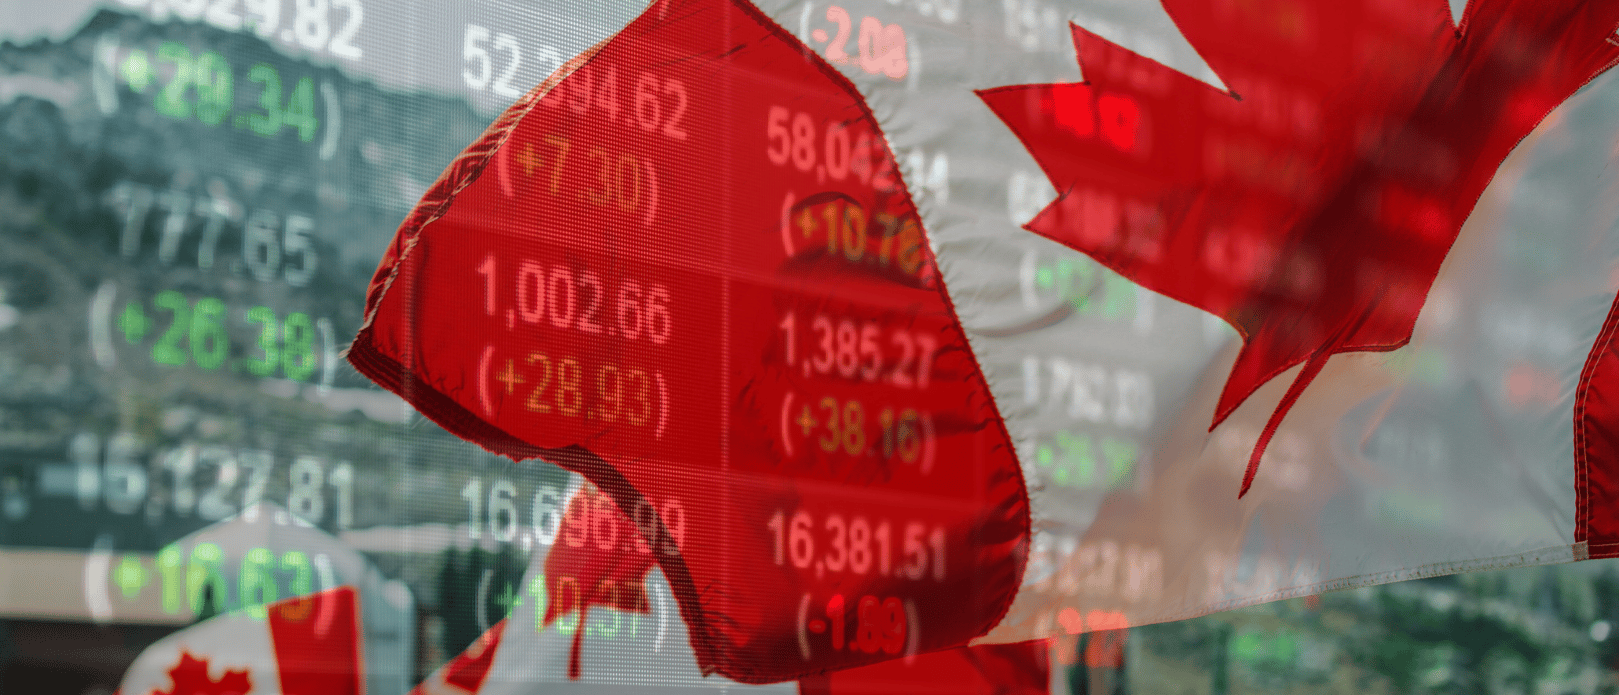 Translucent Canadian flag over stock market index and etf values 